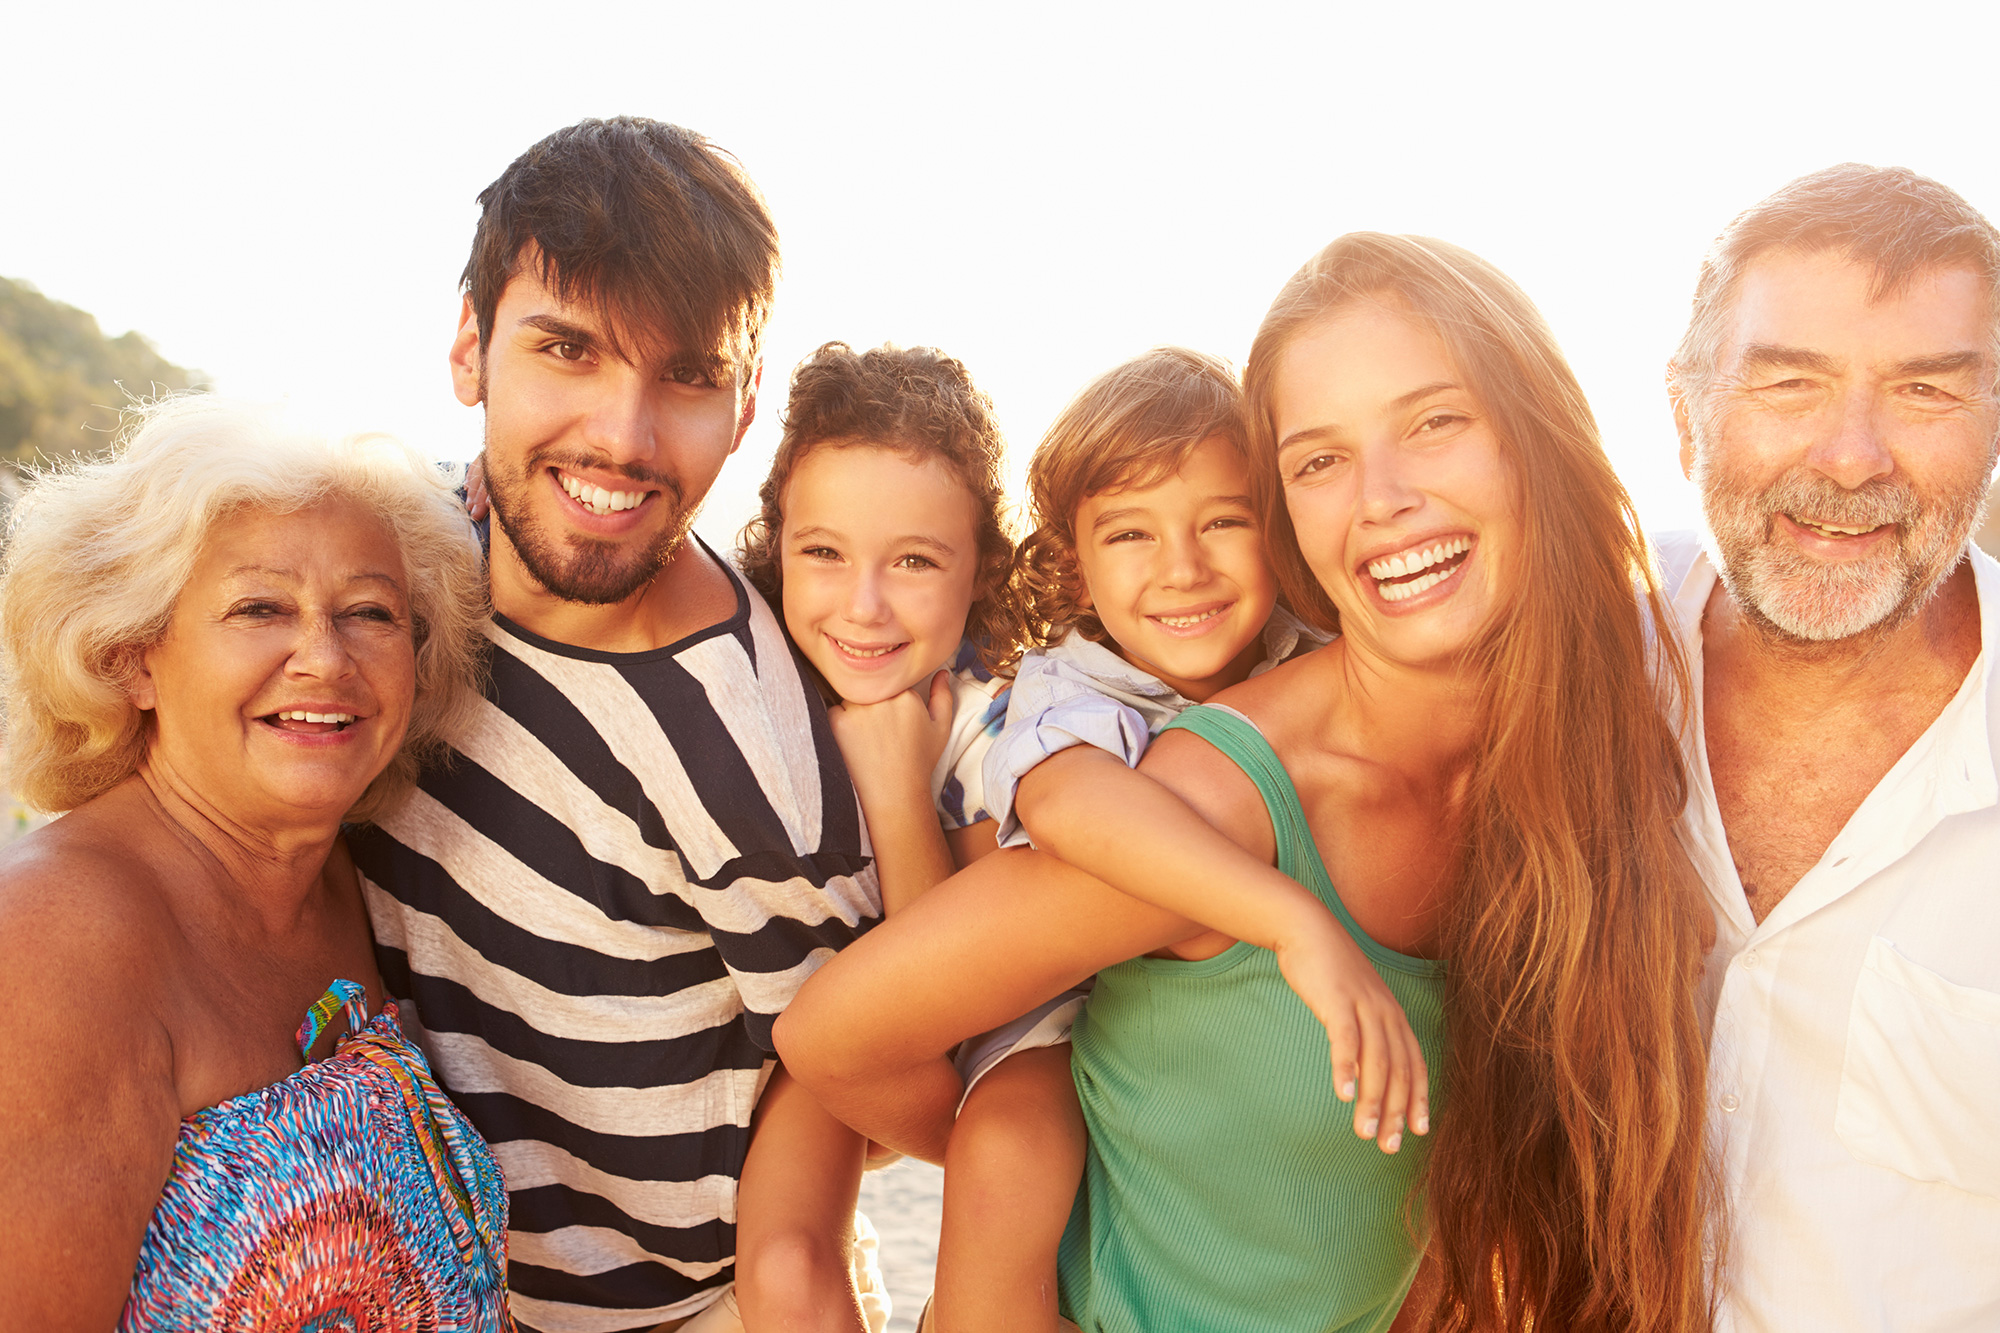 98% of multi-gen travelers highly satisfied taking a trip with parents, kids & grandparents